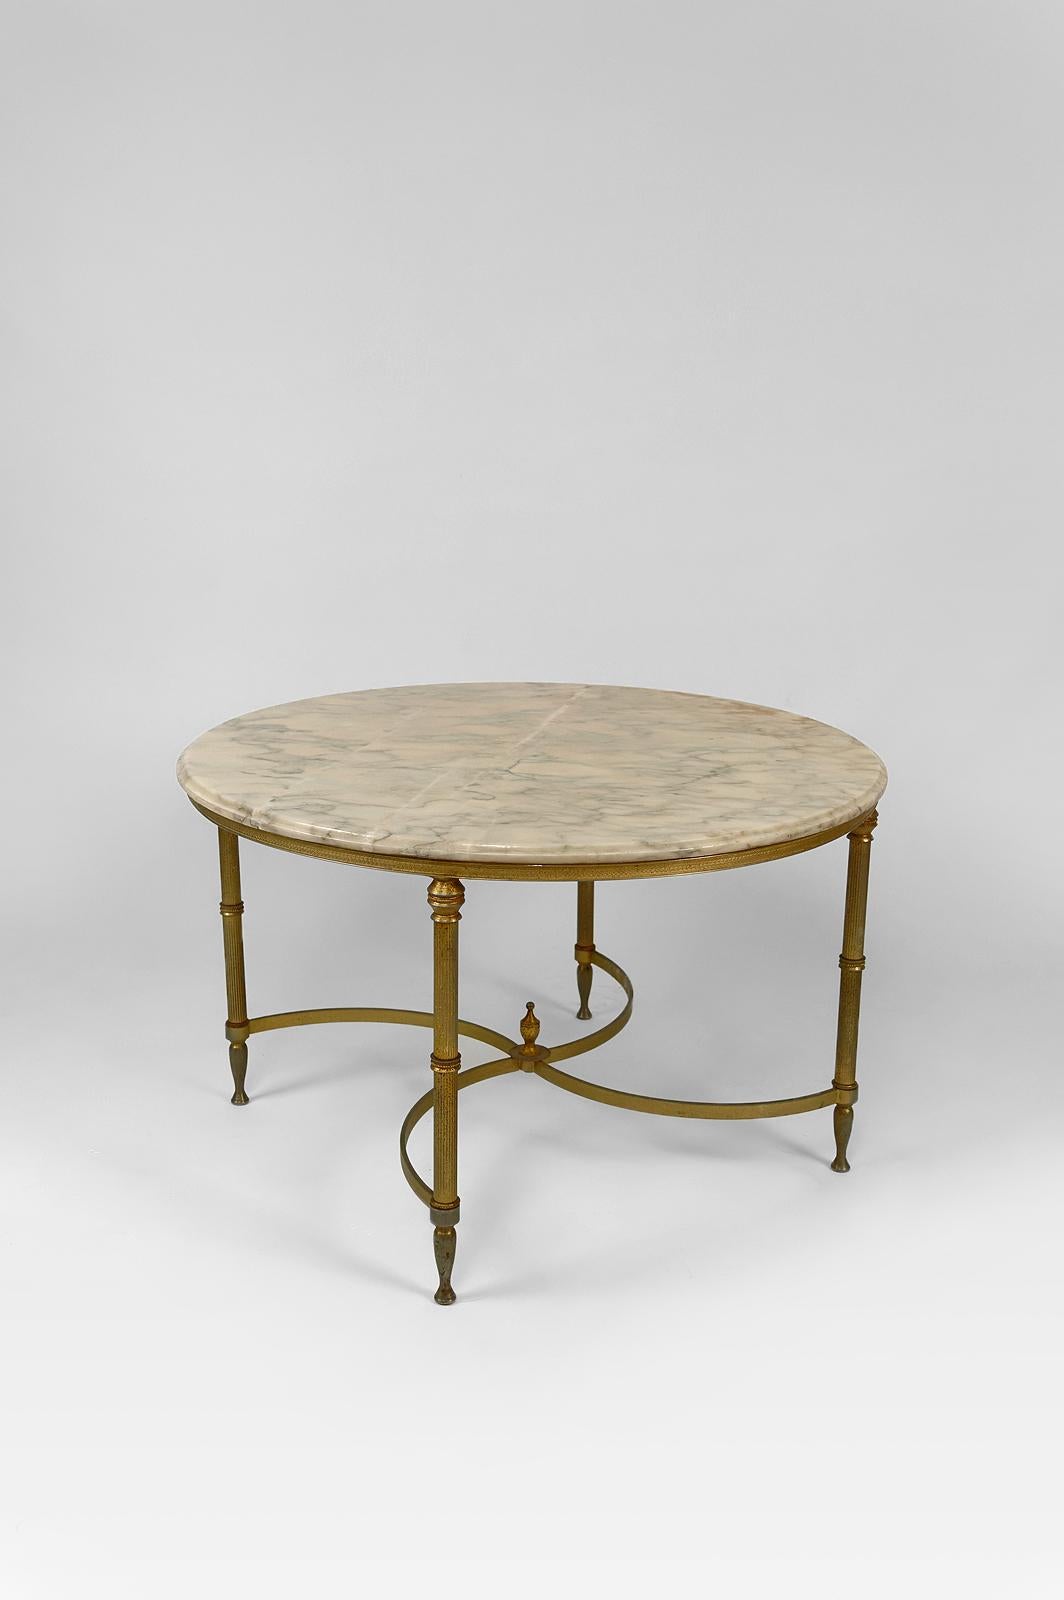 Neoclassical Revival Neoclassical circular/round coffee table, Brass and Marble, France, circa 1960 For Sale